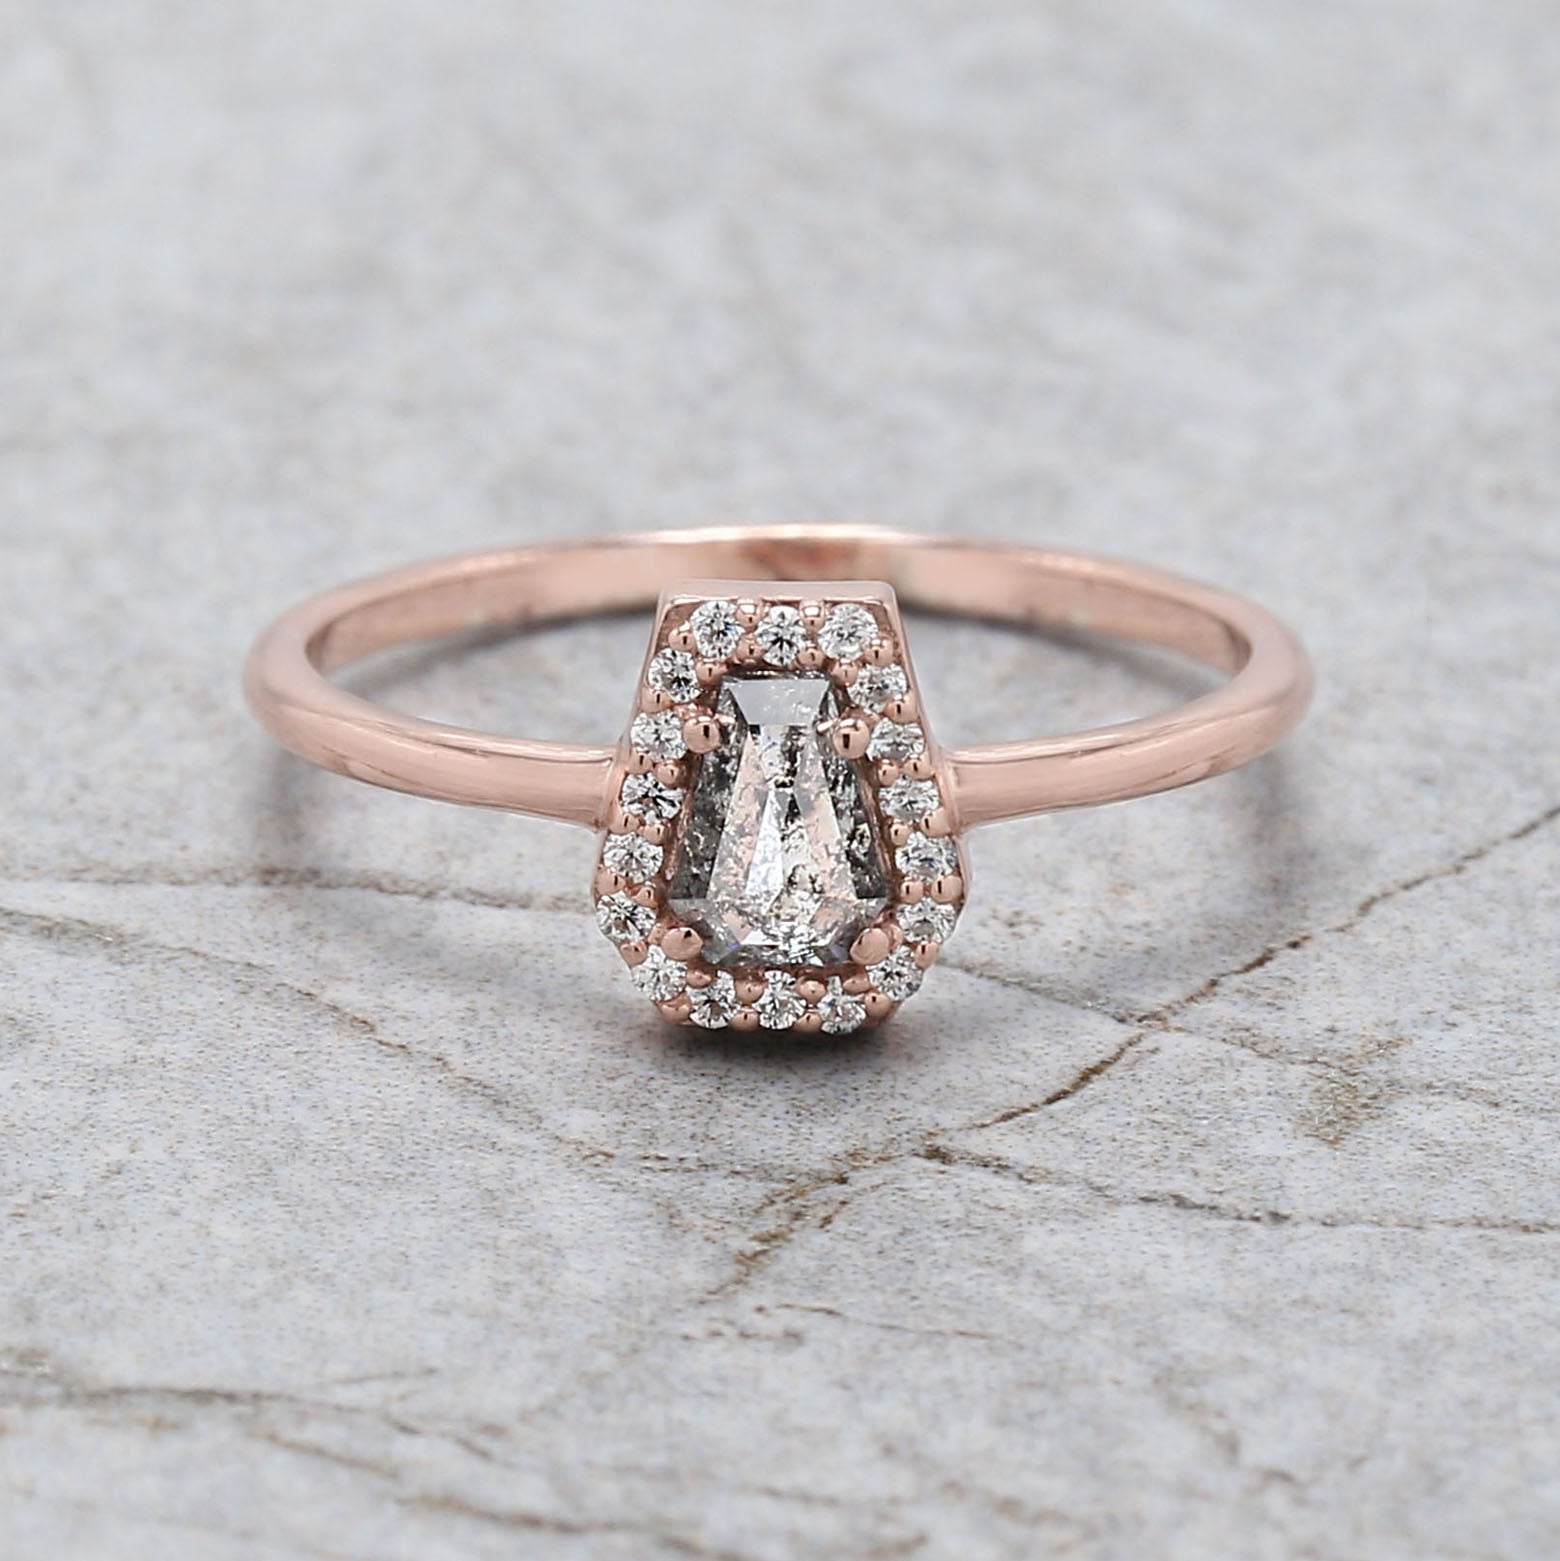 Coffin Salt And Pepper Diamond Ring 0.34 Ct 5.05 MM Coffin Cut Diamond Ring 14K Solid Rose Gold Silver Engagement Ring Gift For Her QK2401